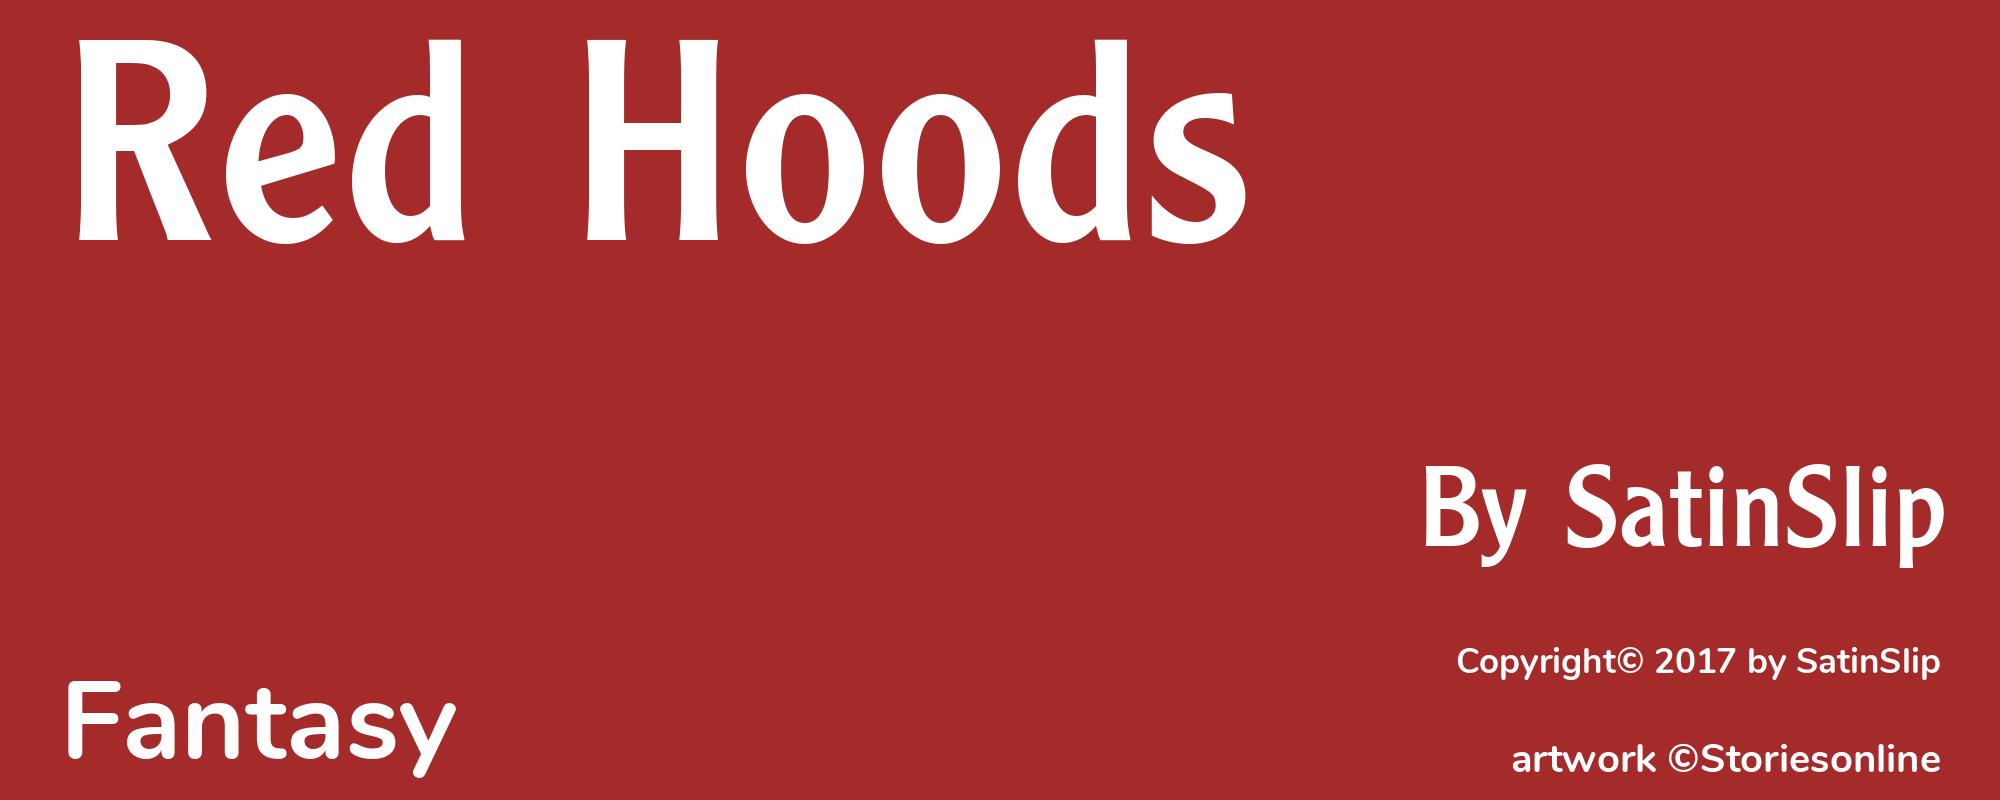 Red Hoods - Cover